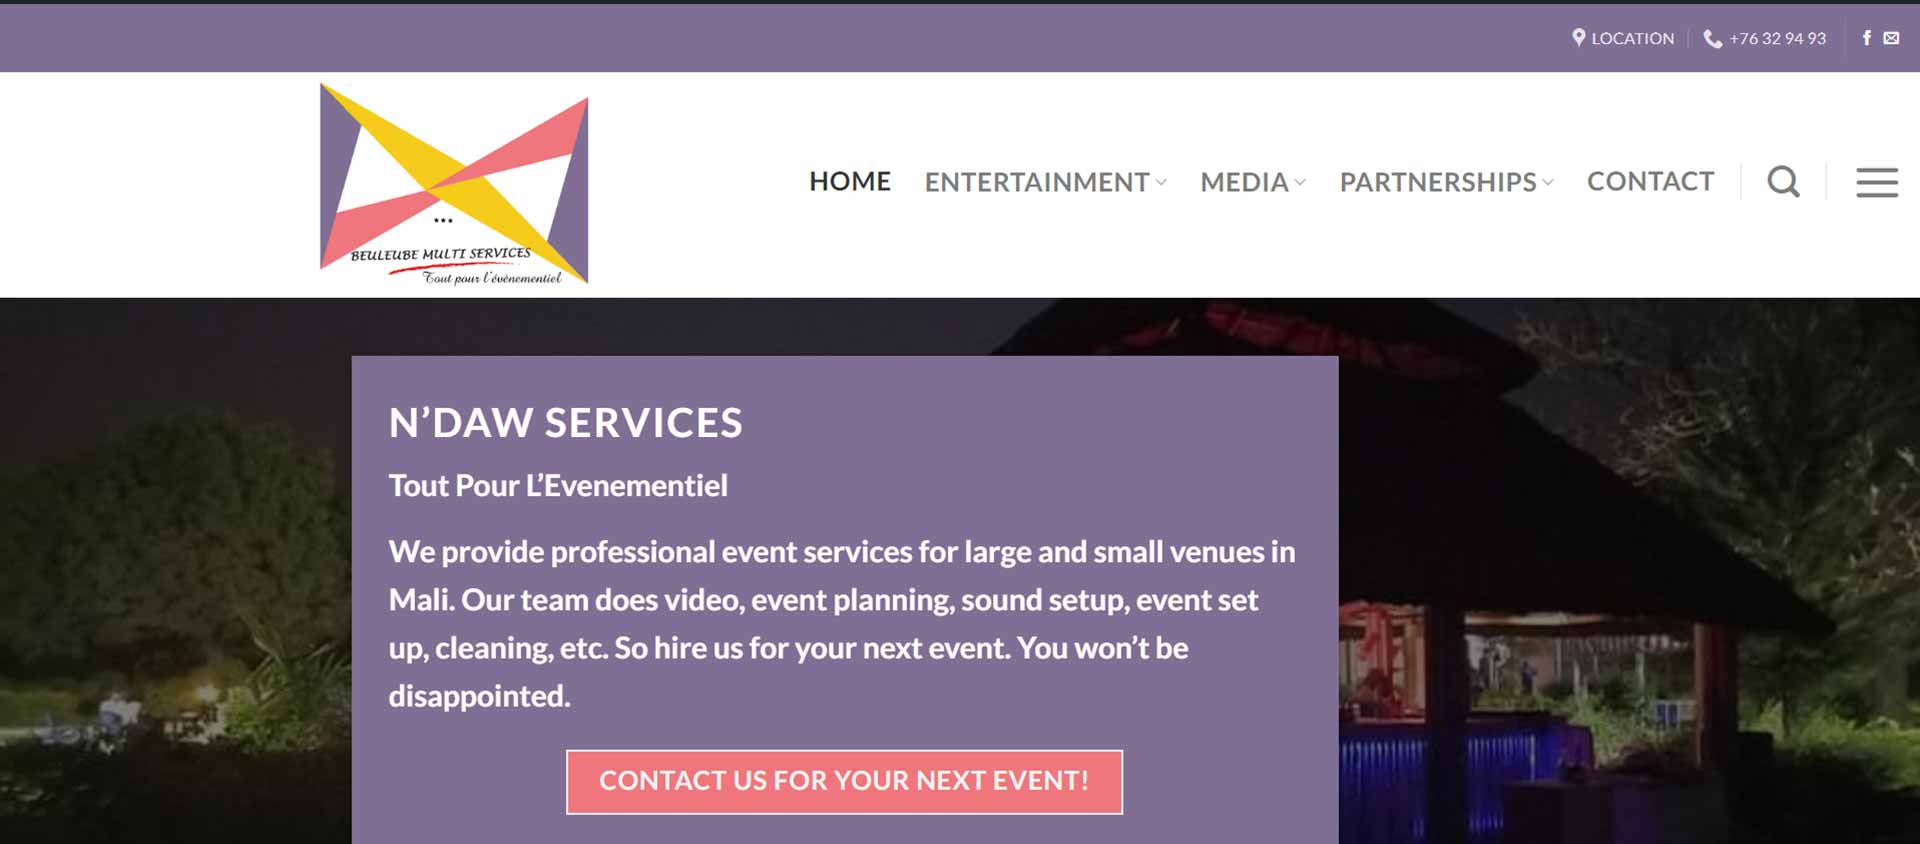 ndaw-services for entertainment services